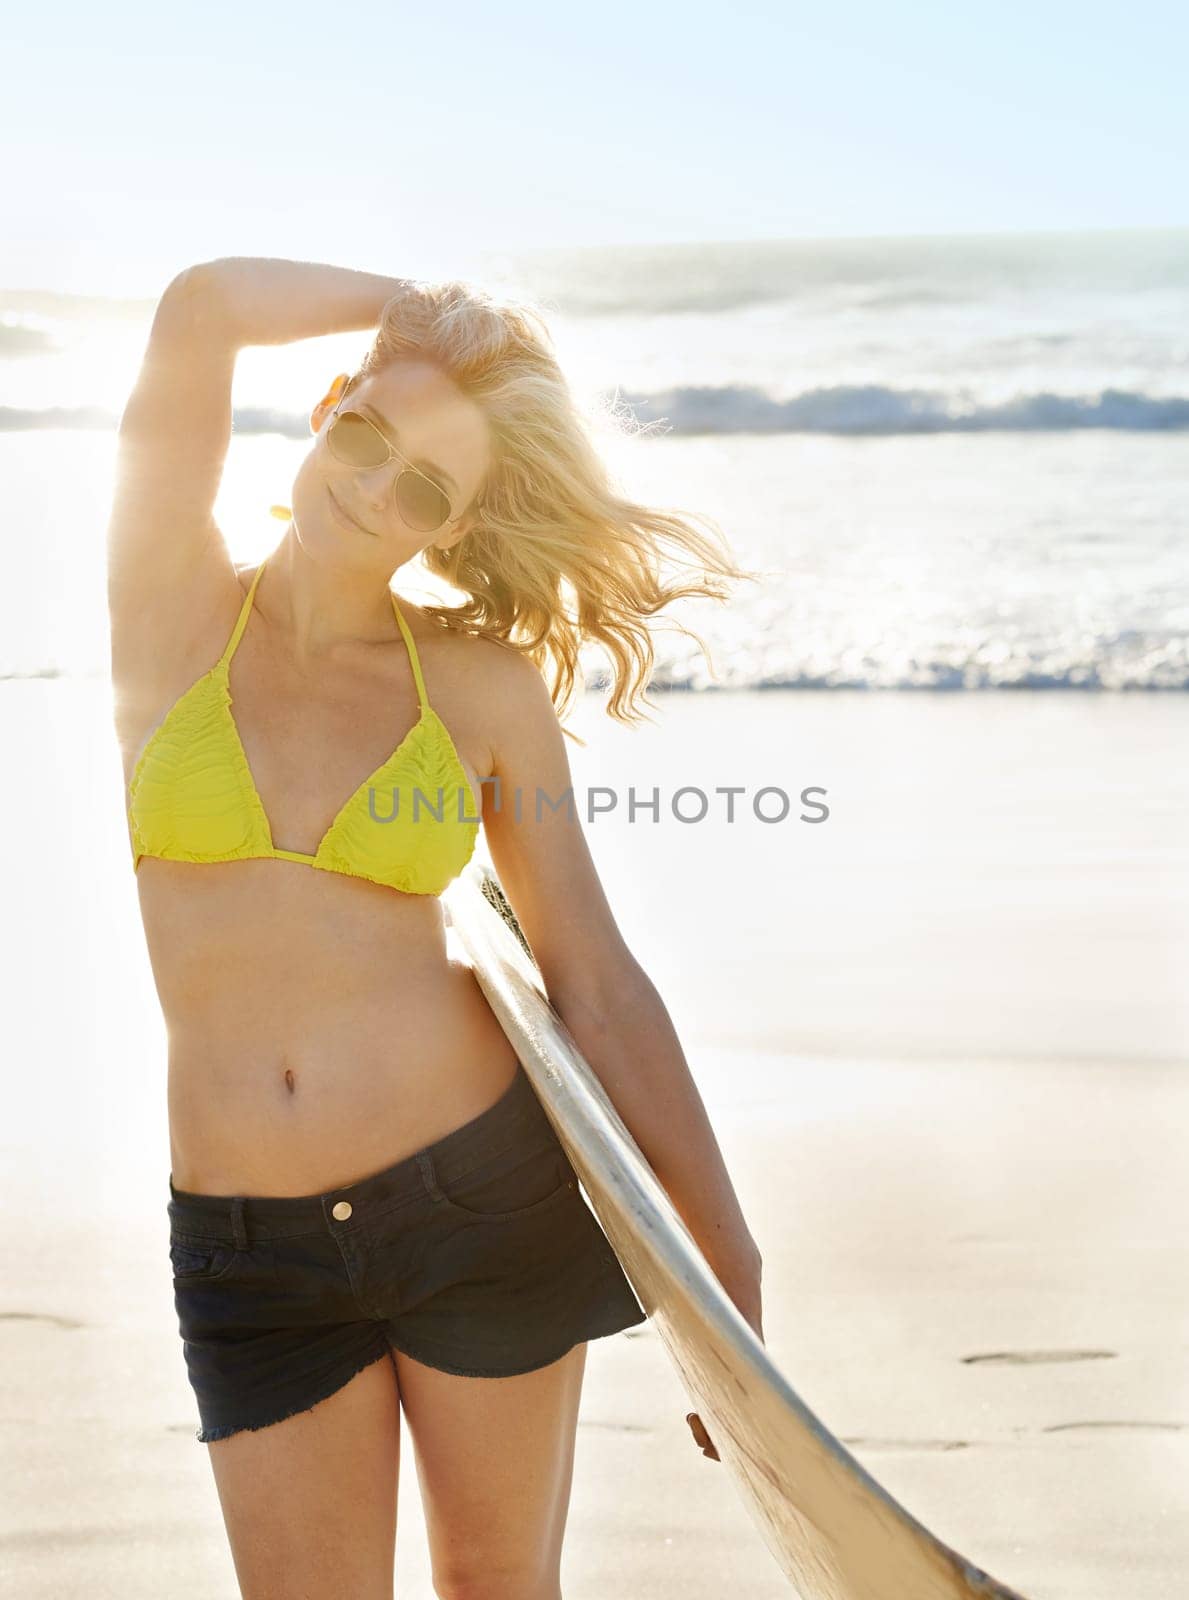 Surfboard, sunglasses and woman by beach for vacation, adventure or holiday in Australia for travel. Happy, water sports and female surfer in bikini by ocean or sea for tropical island weekend trip